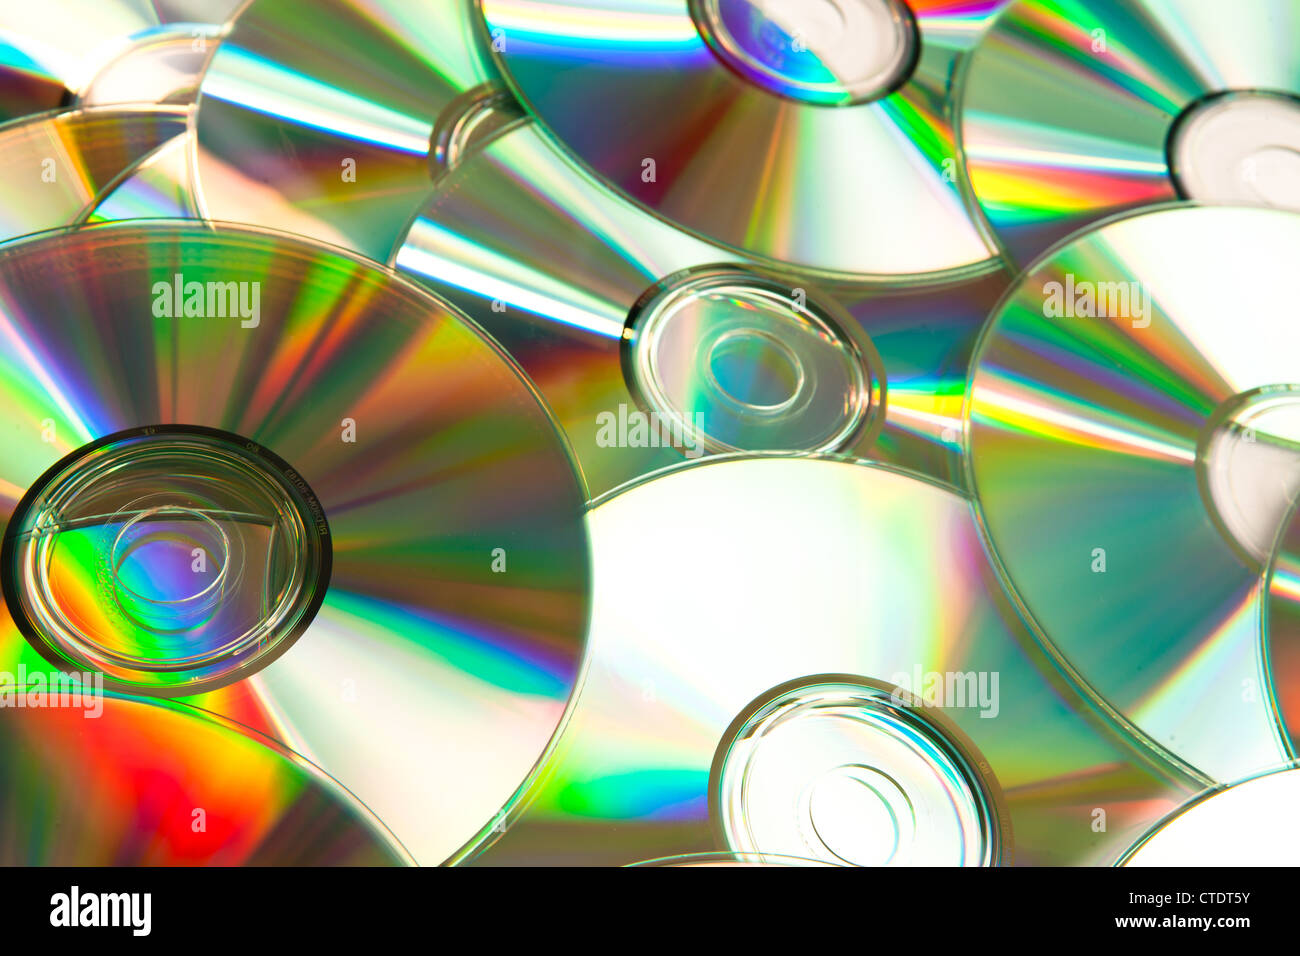 Music cd piled up Stock Photo